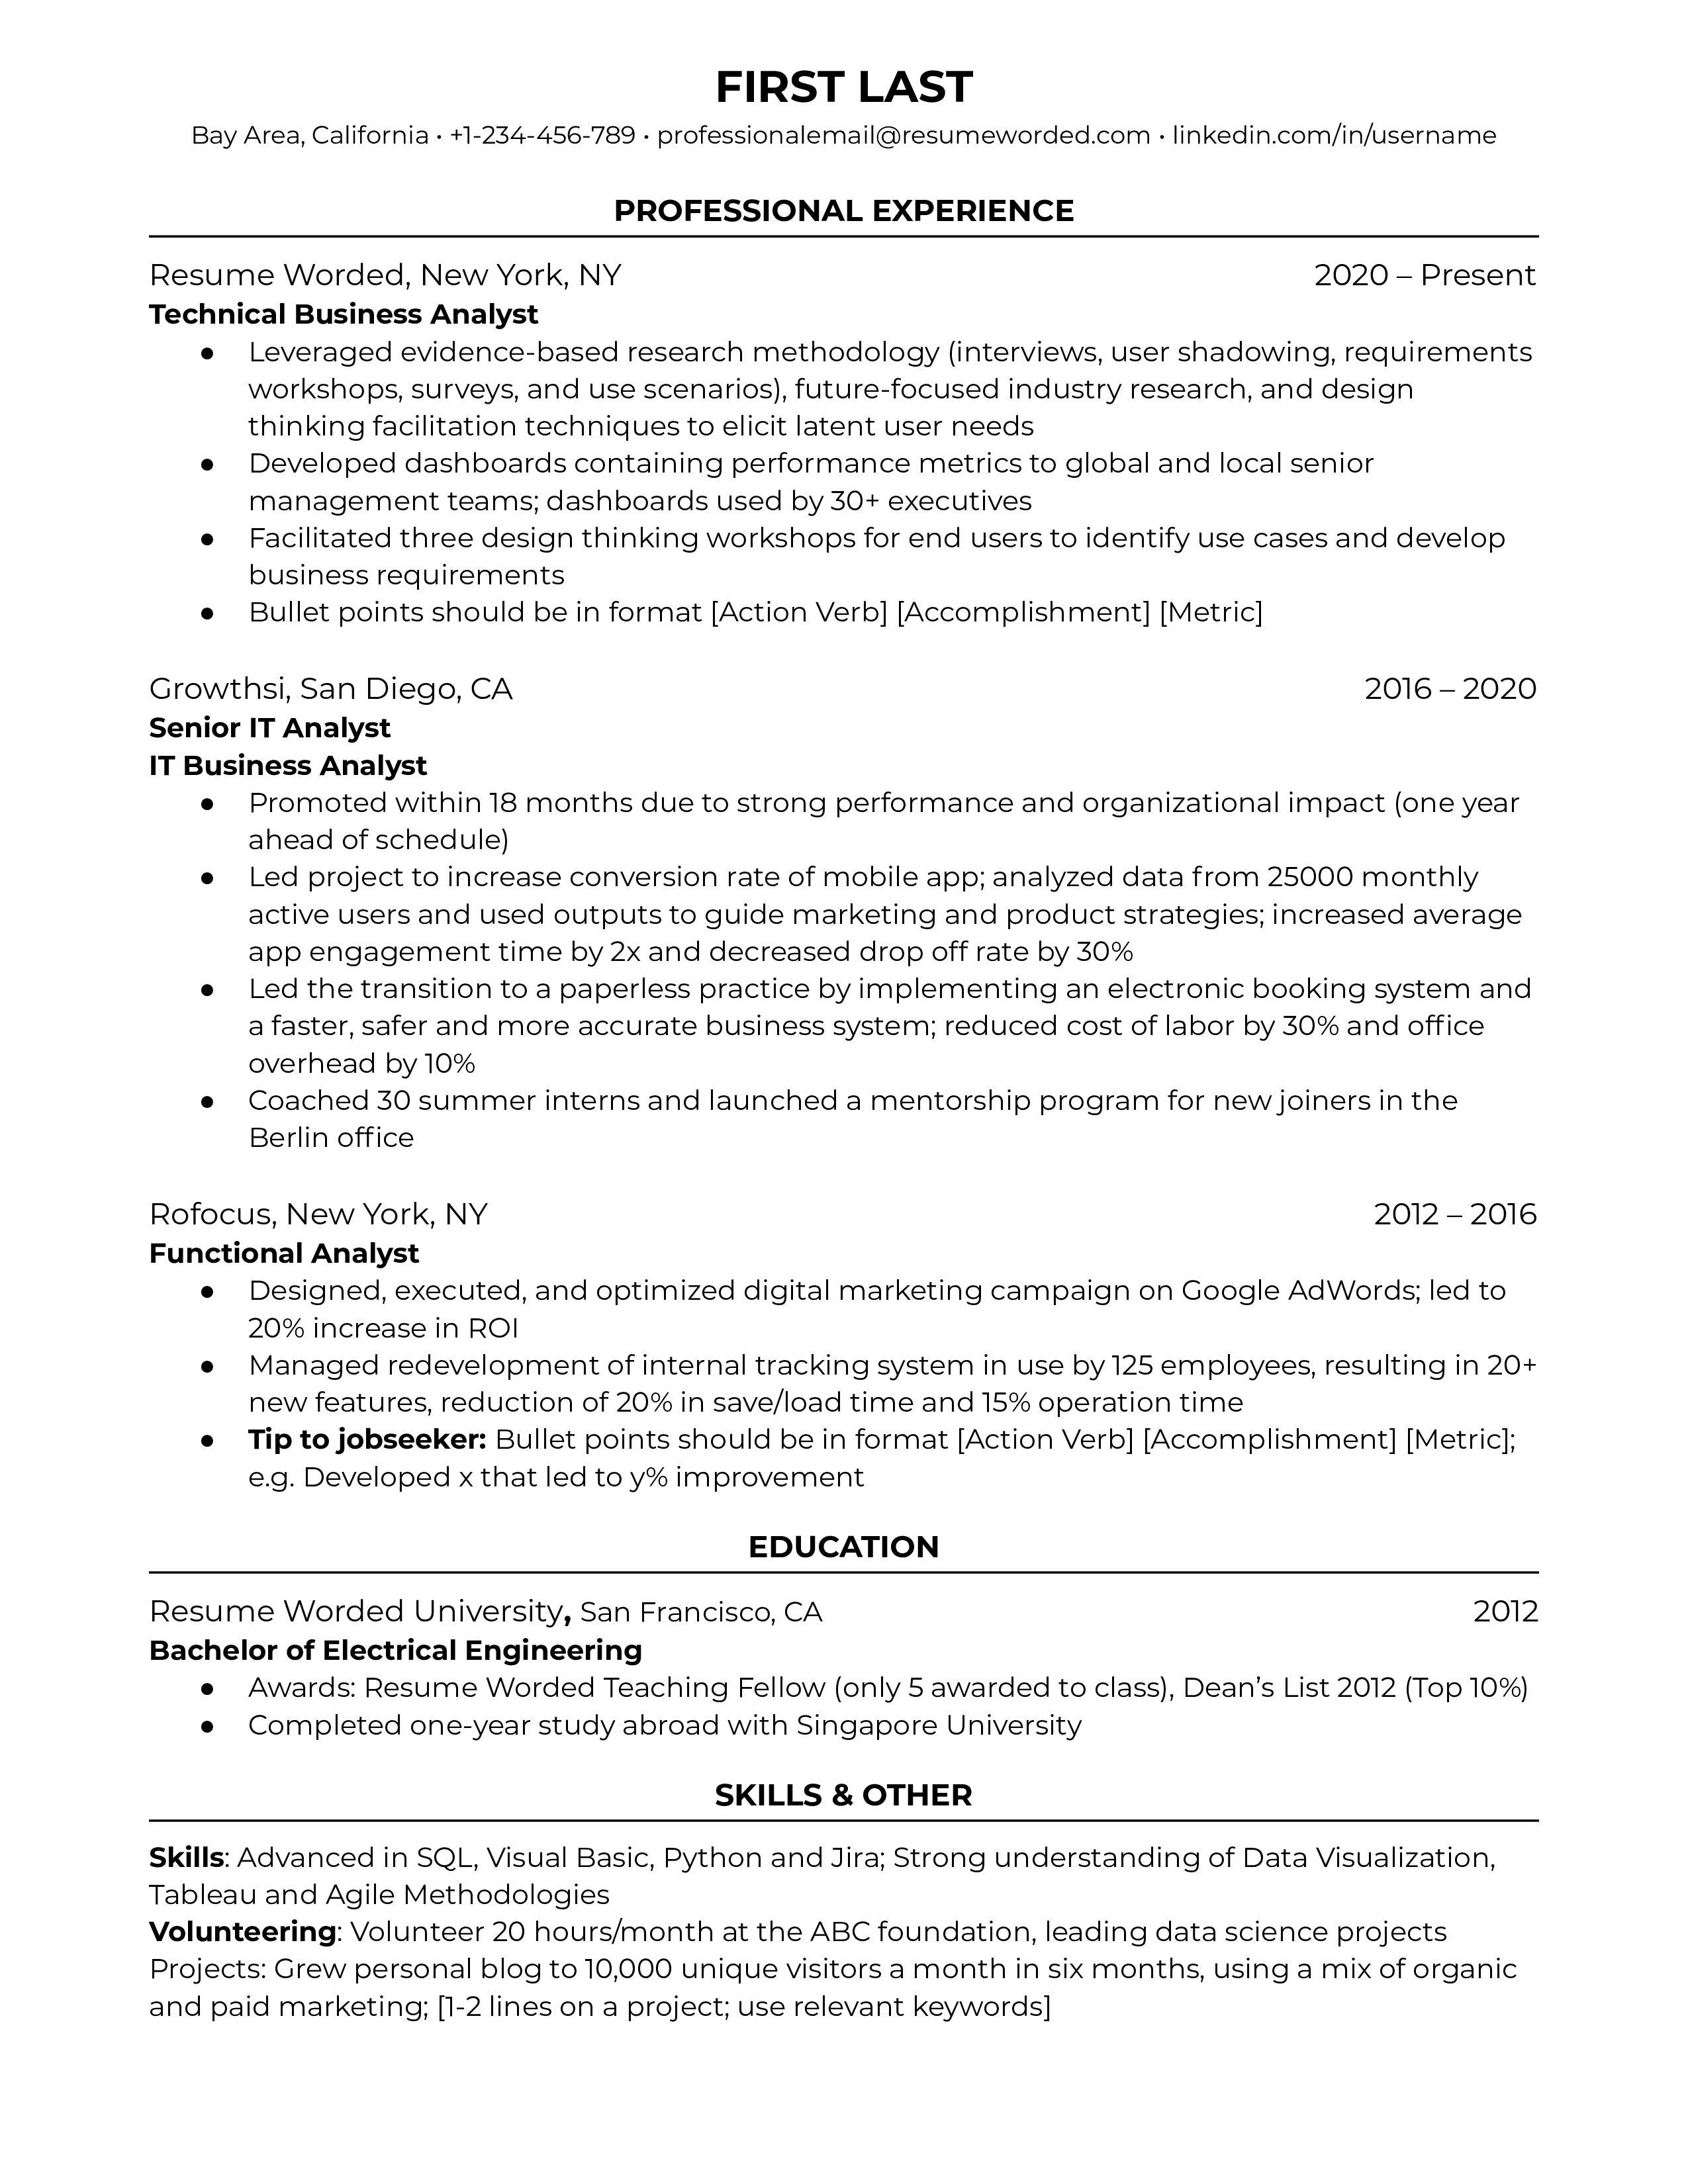 Technical Business Analyst Resume Sample